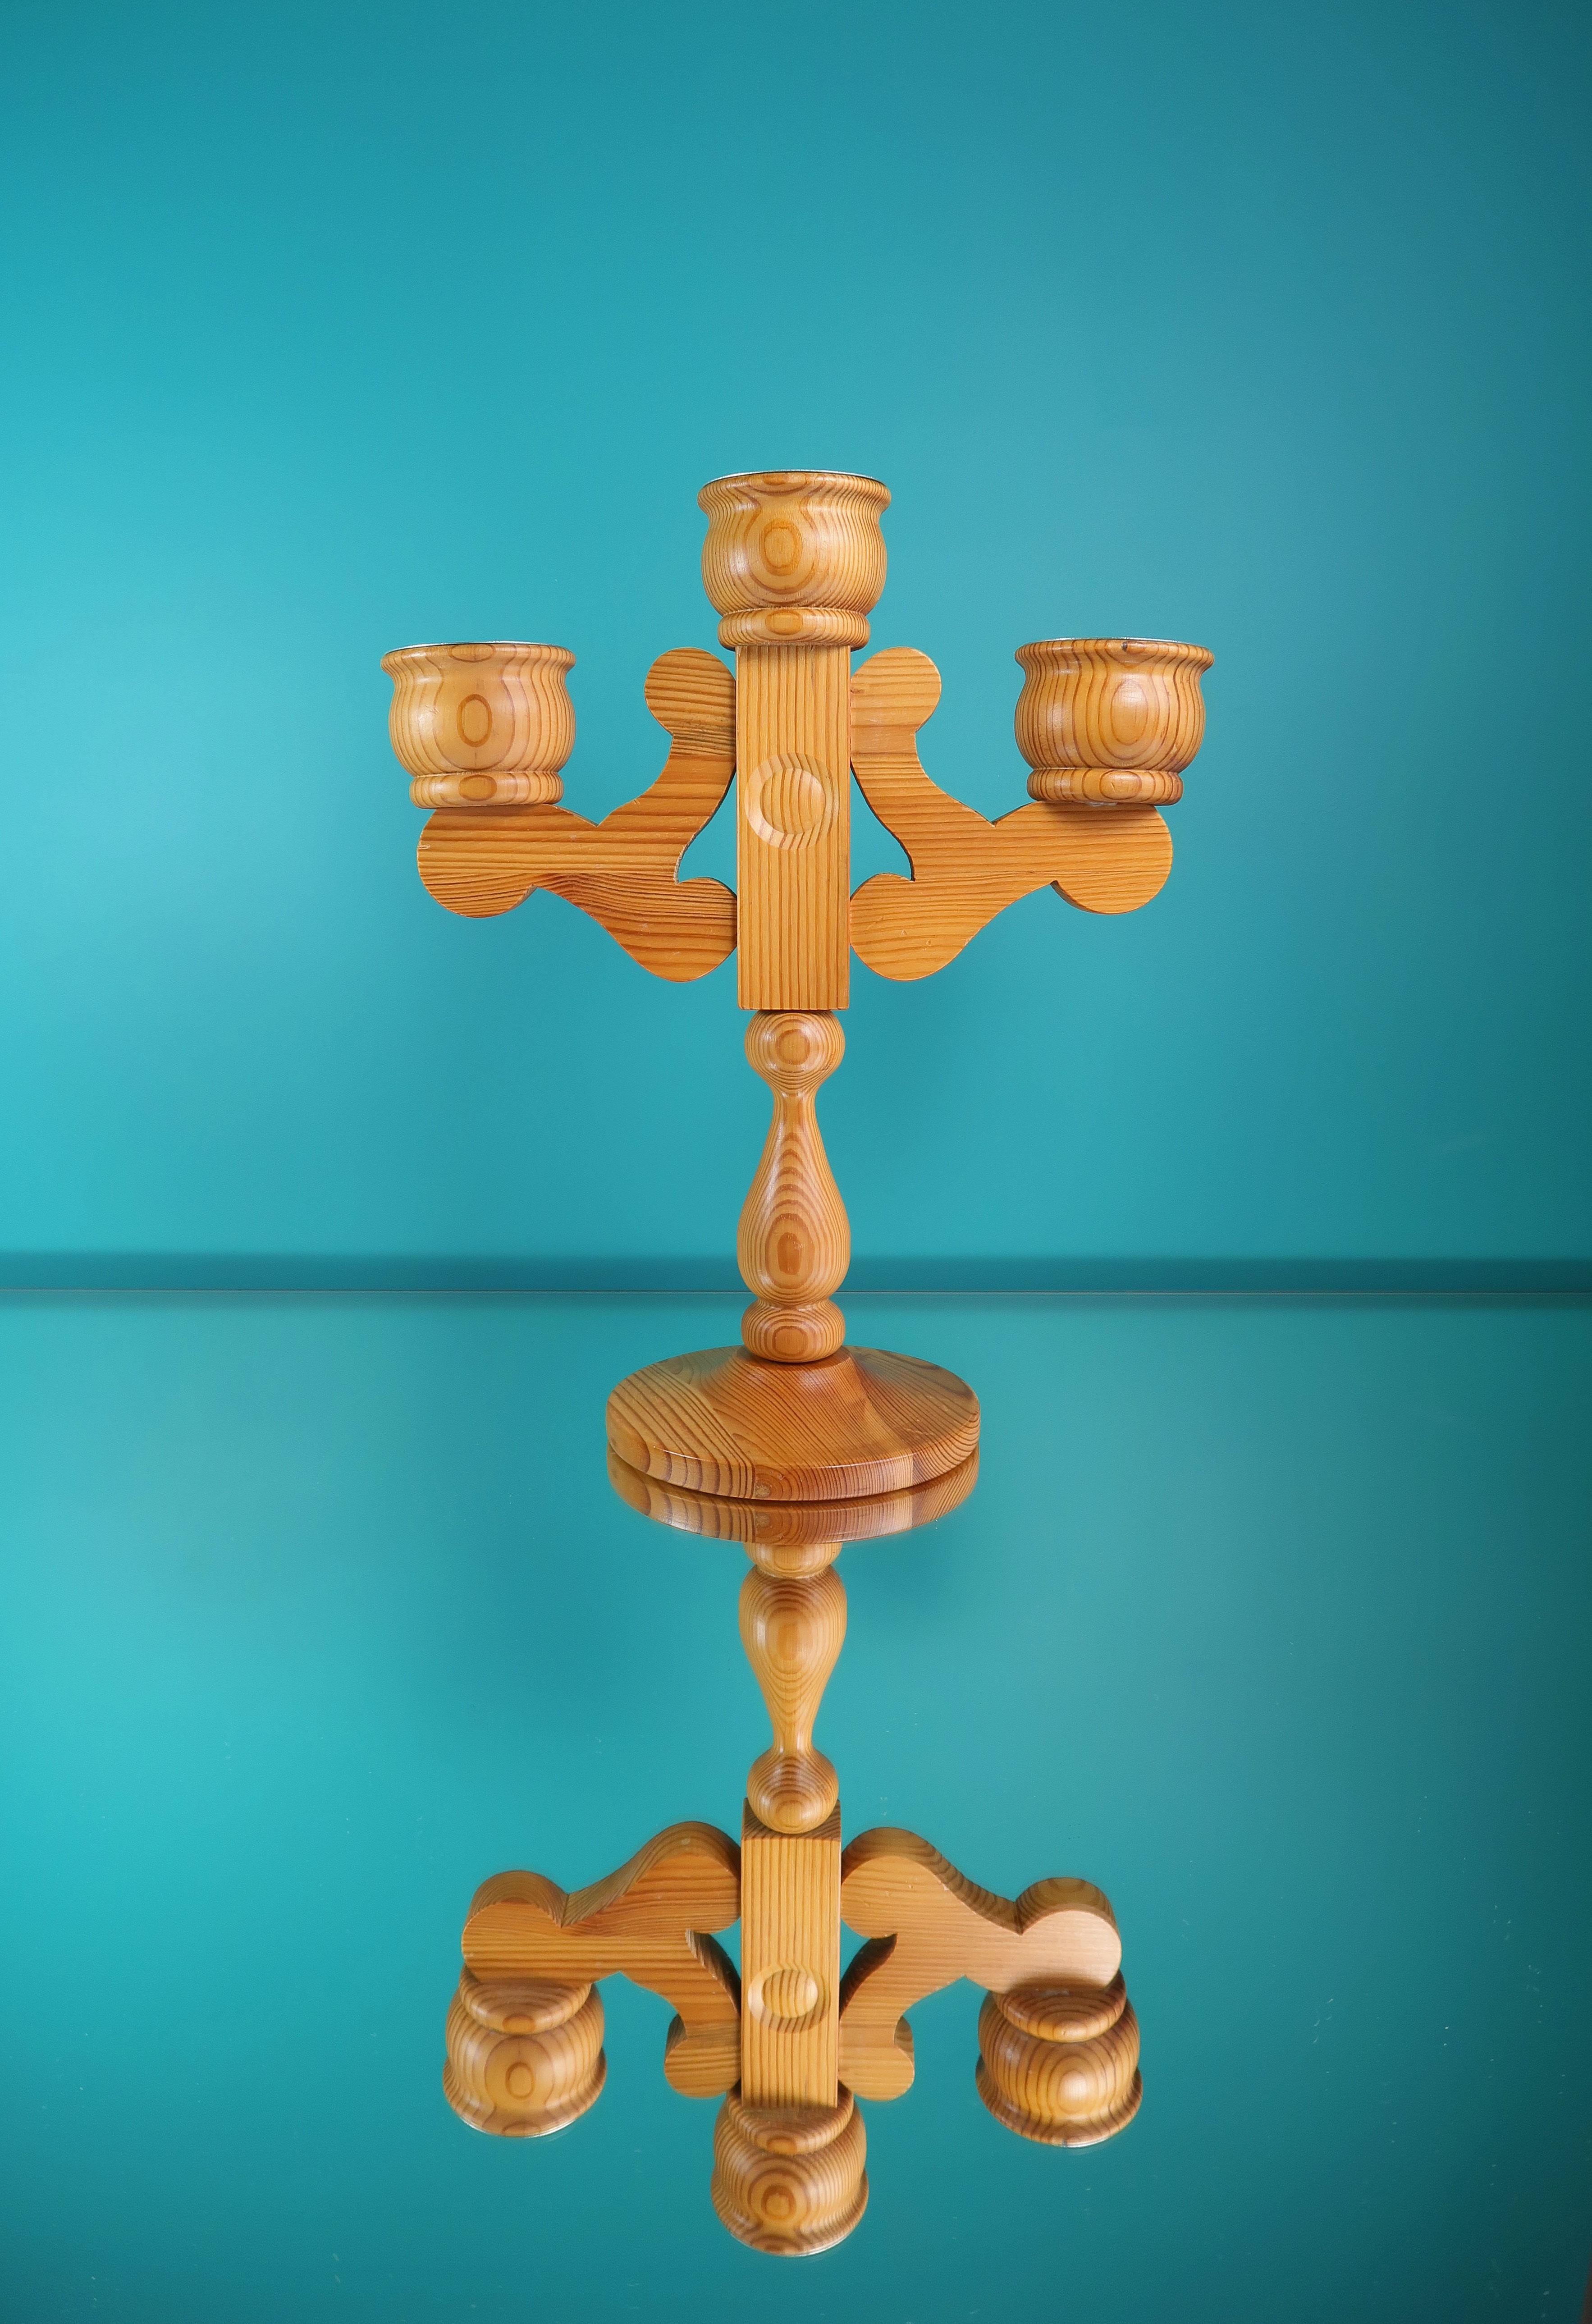 Large Swedish midcentury modern solid pine wood candelabra. Designed by Stig Johnsson and manufactured in the 1960s by Smålandsslöjd in the small Swedish town of Värnamo. Handmade with rounded organic shapes and three arms fitted for both slender